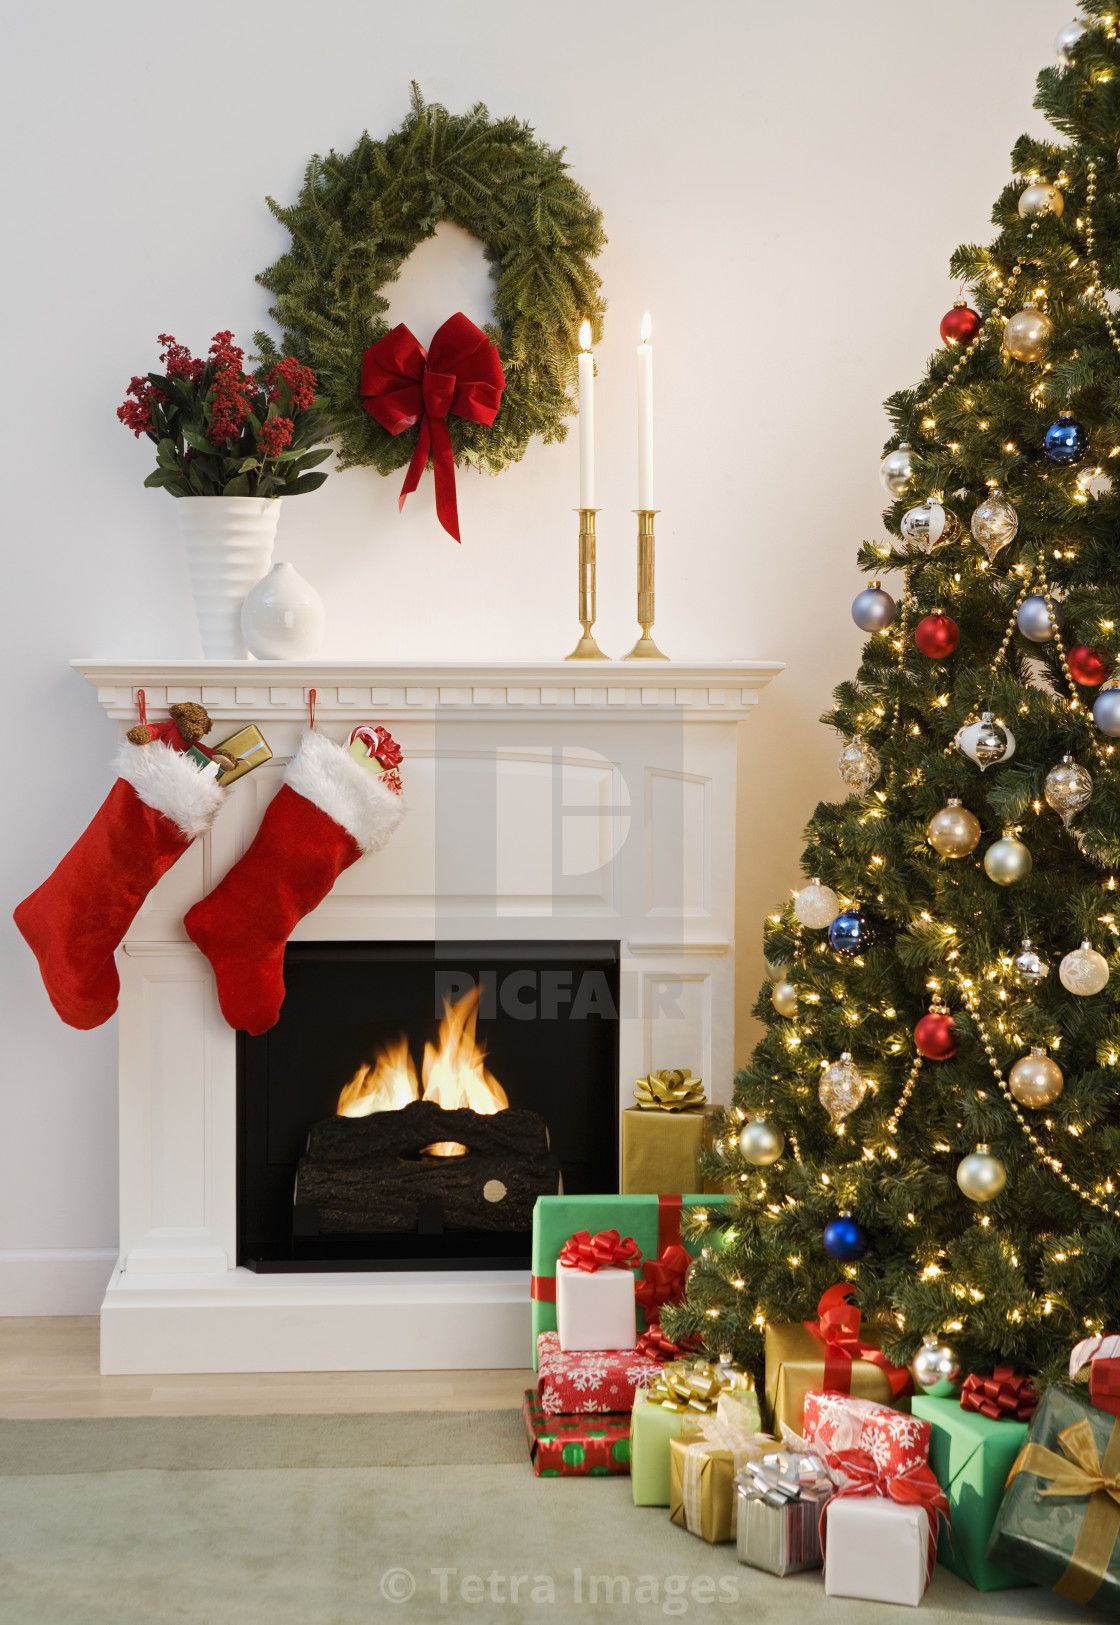 Christmas tree with presents and fireplace with stockings, download or print for £30.00